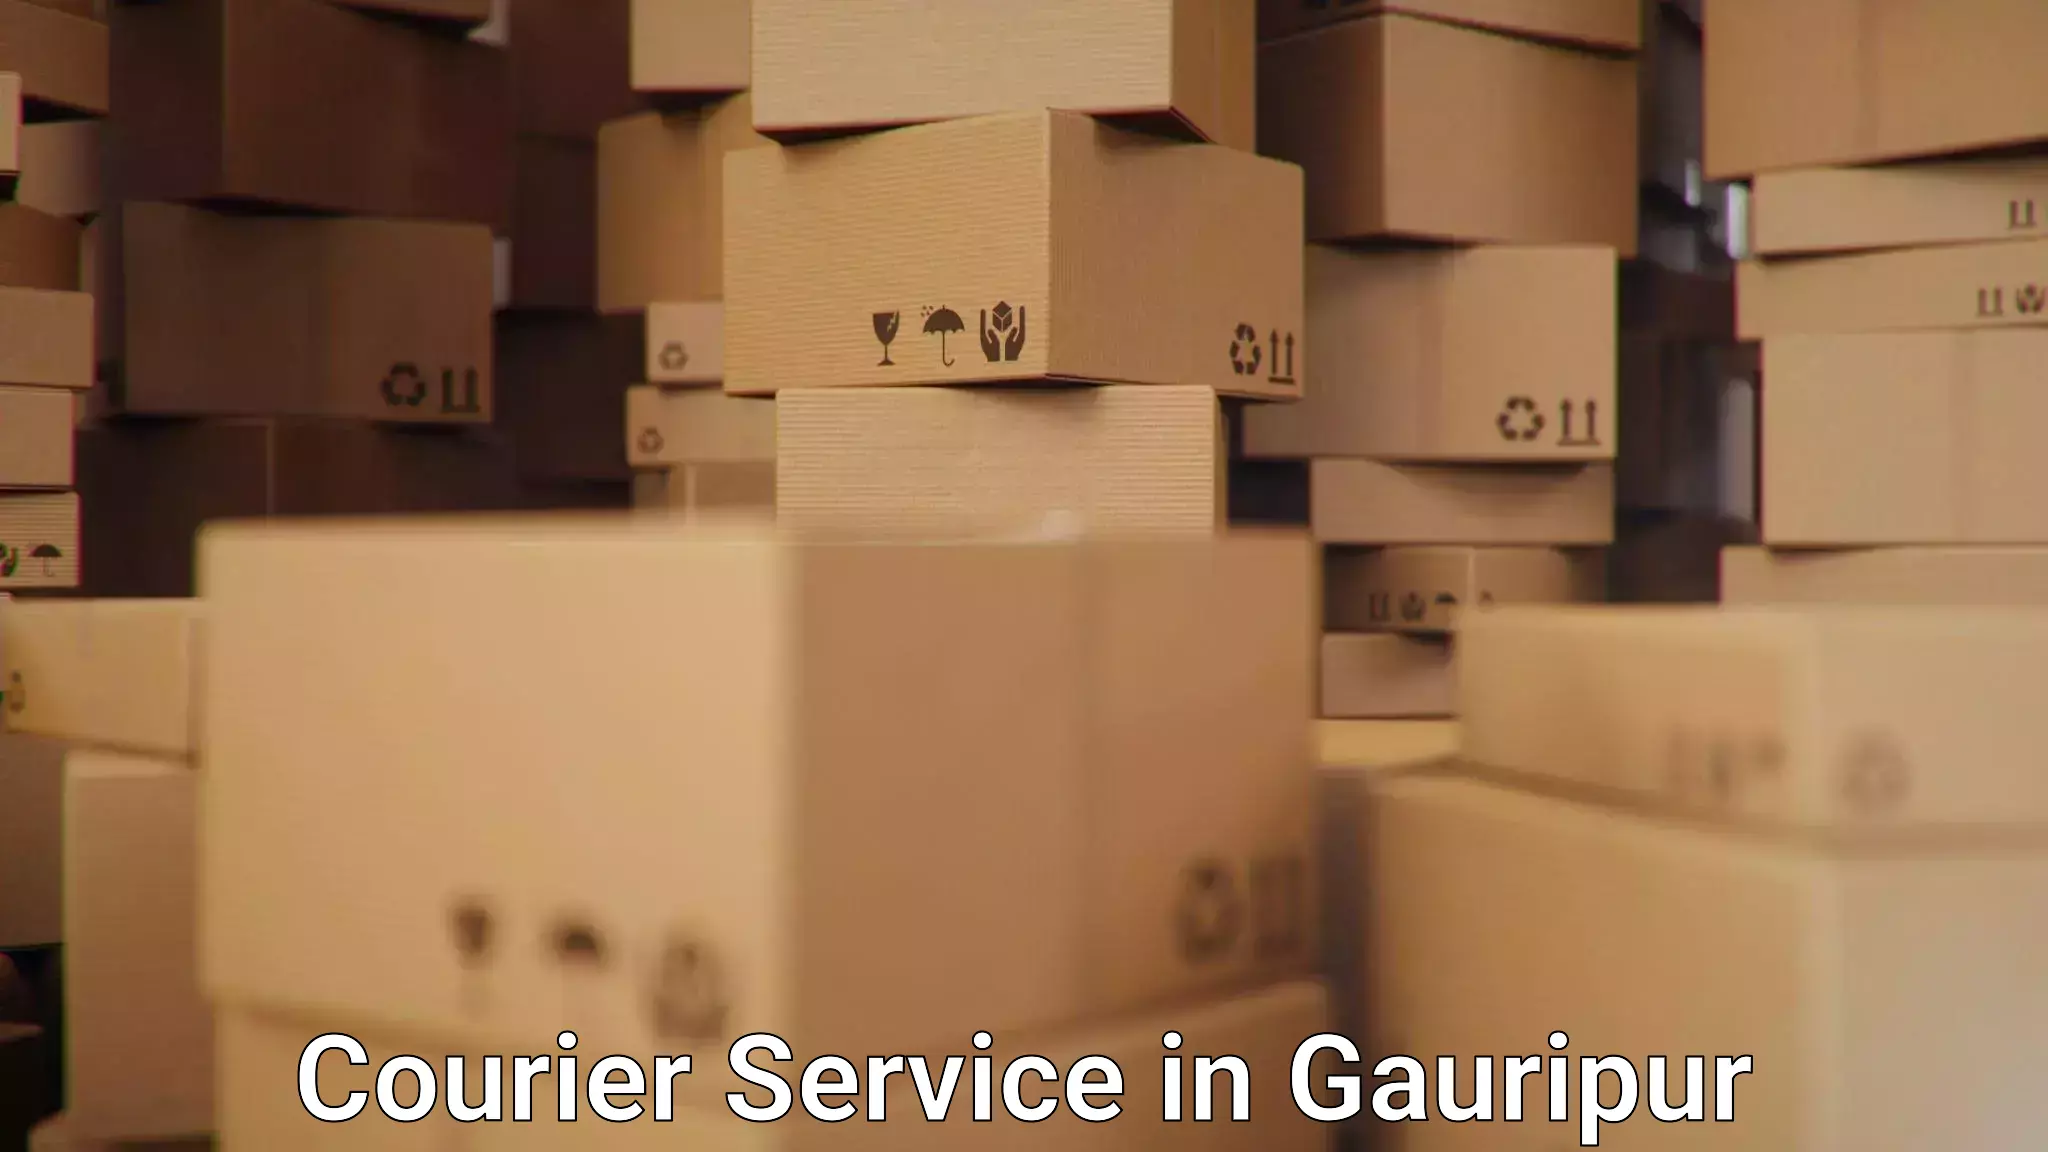 High-capacity shipping options in Gauripur